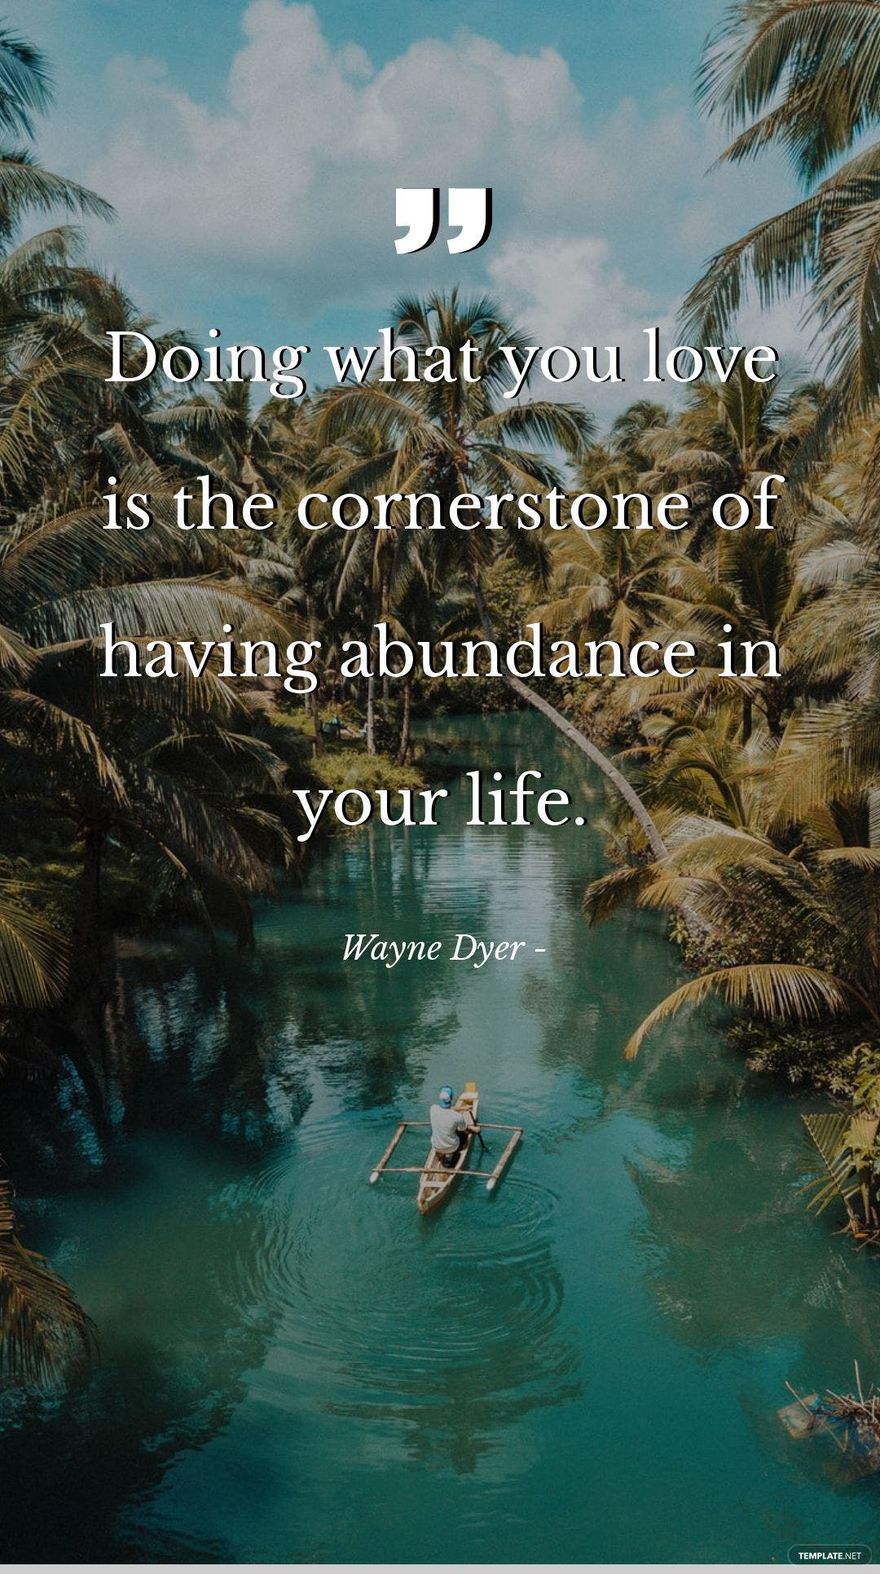 Wayne Dyer - Doing what you love is the cornerstone of having abundance in your life.